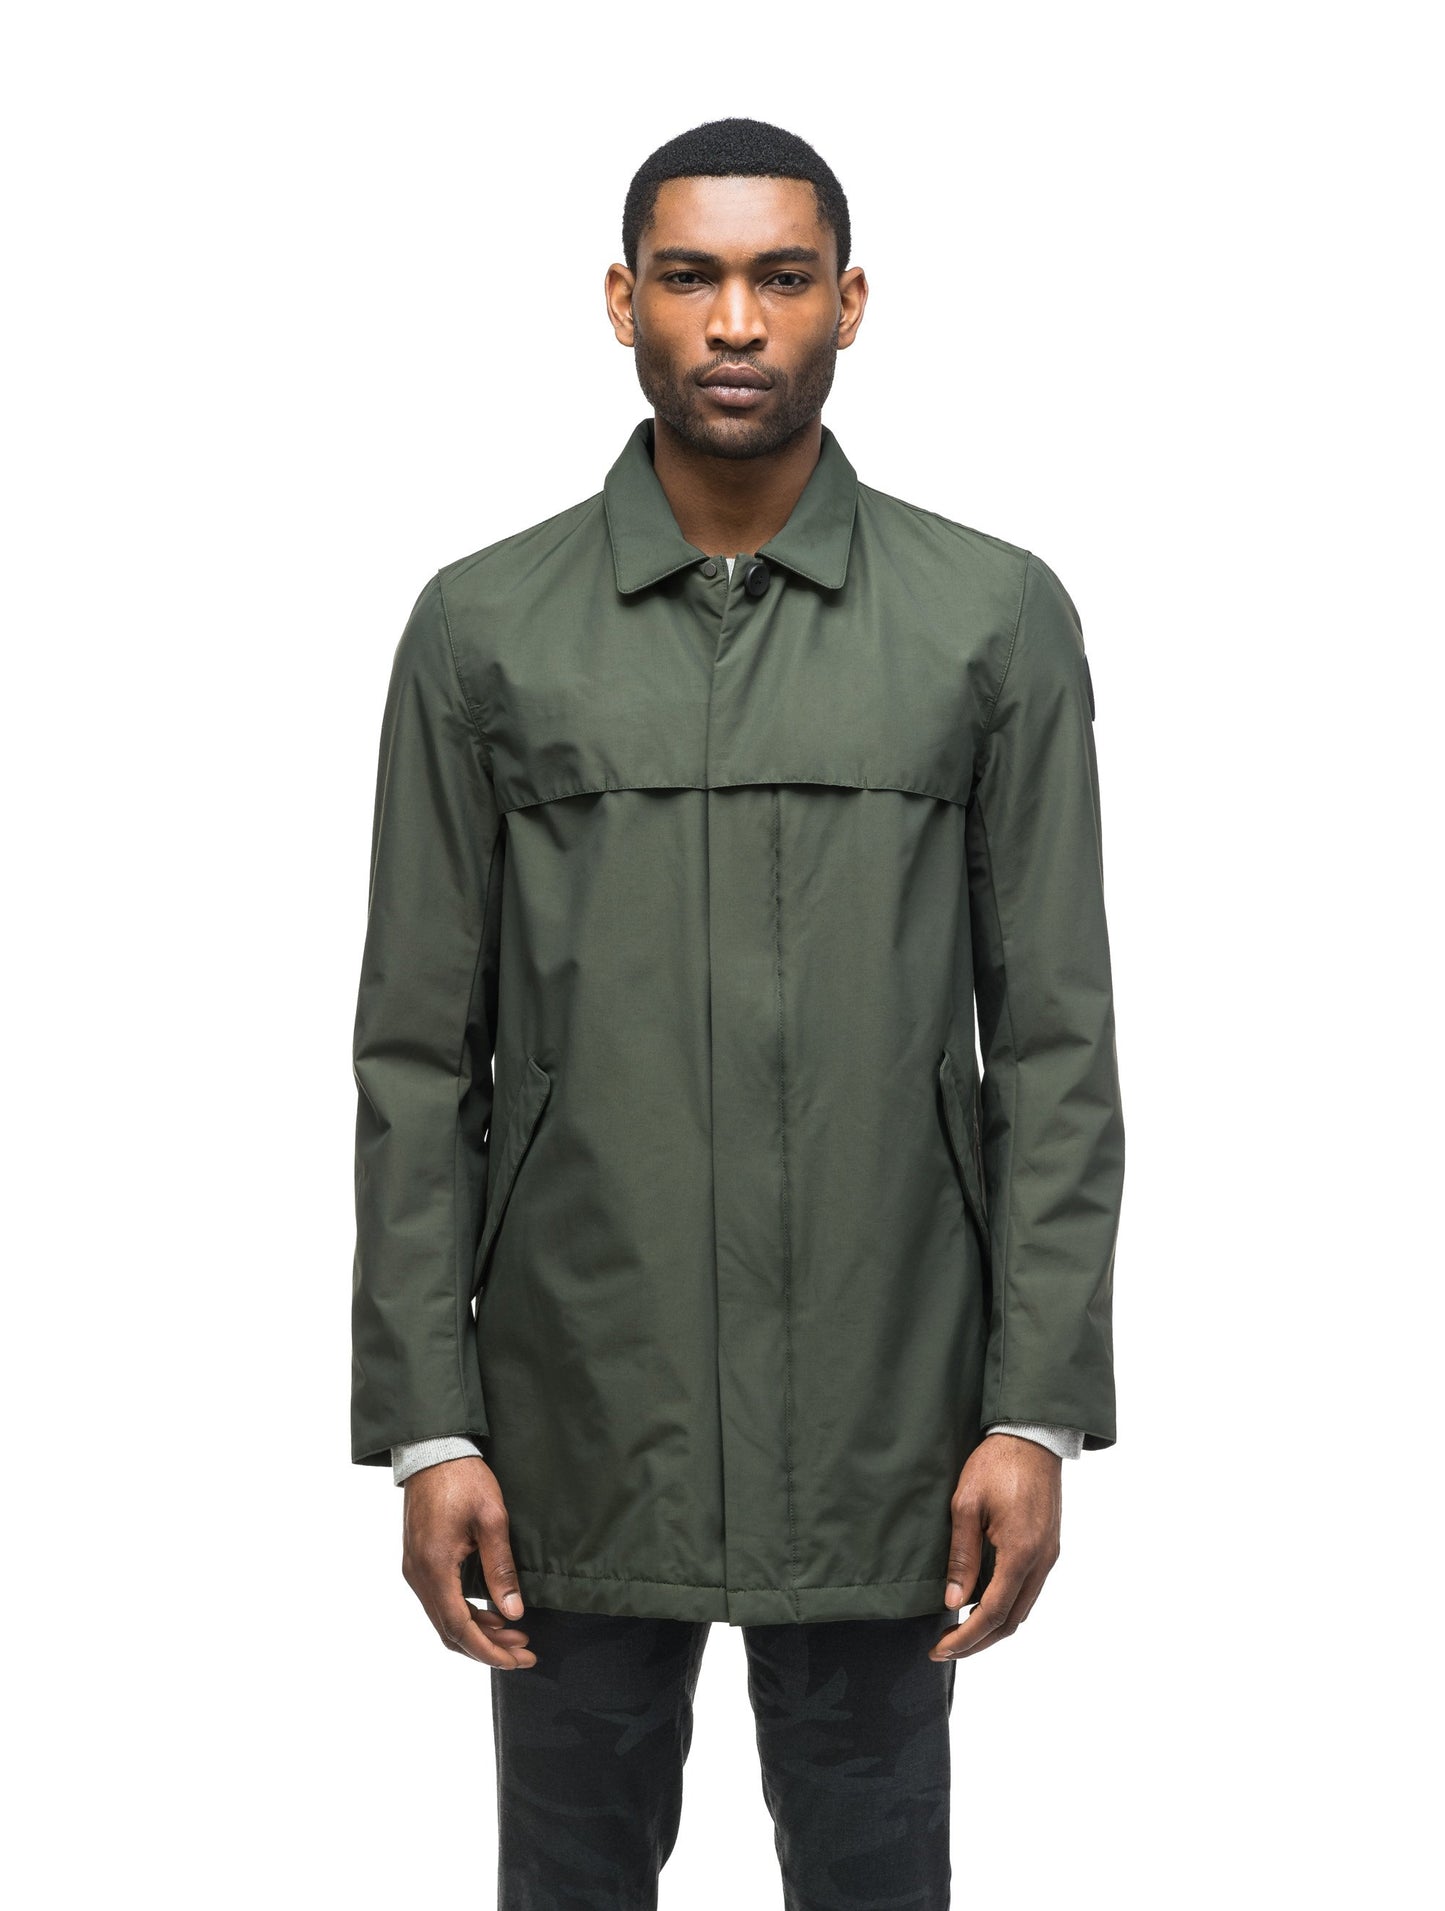 Men's waist length raincoat with a magnetic placket and top button detail in Dk Forest